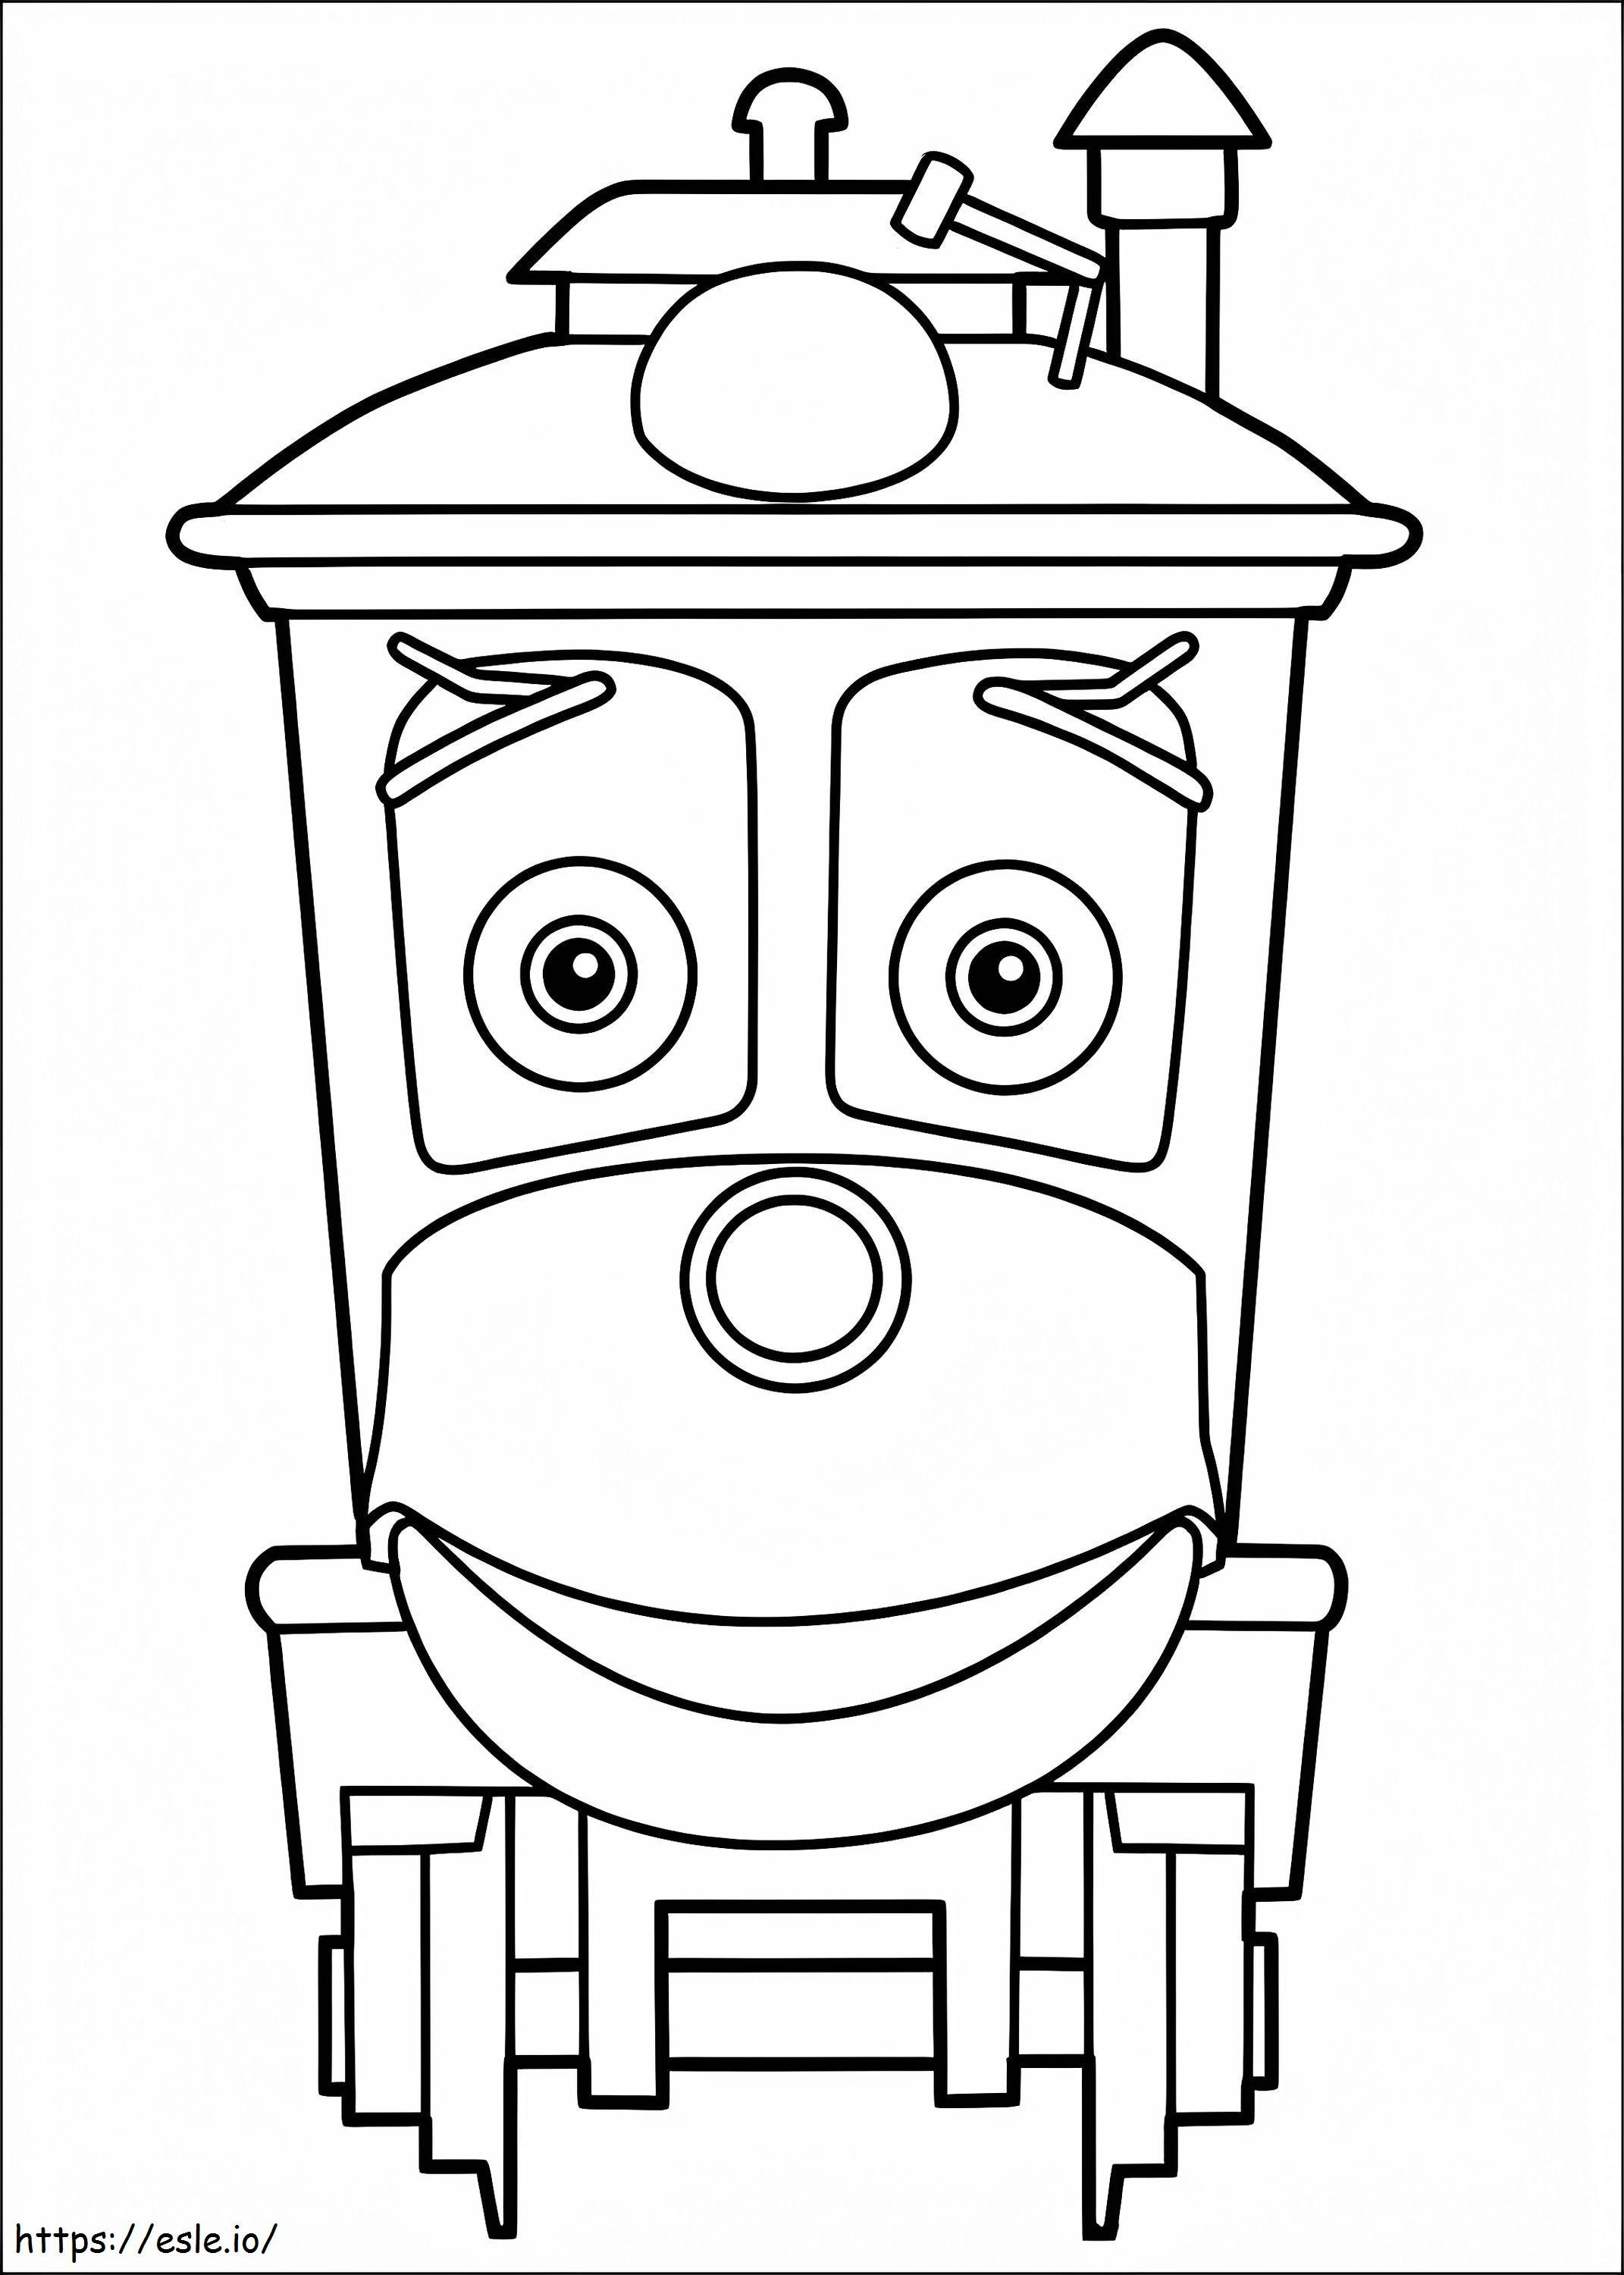 Happy Zephie coloring page